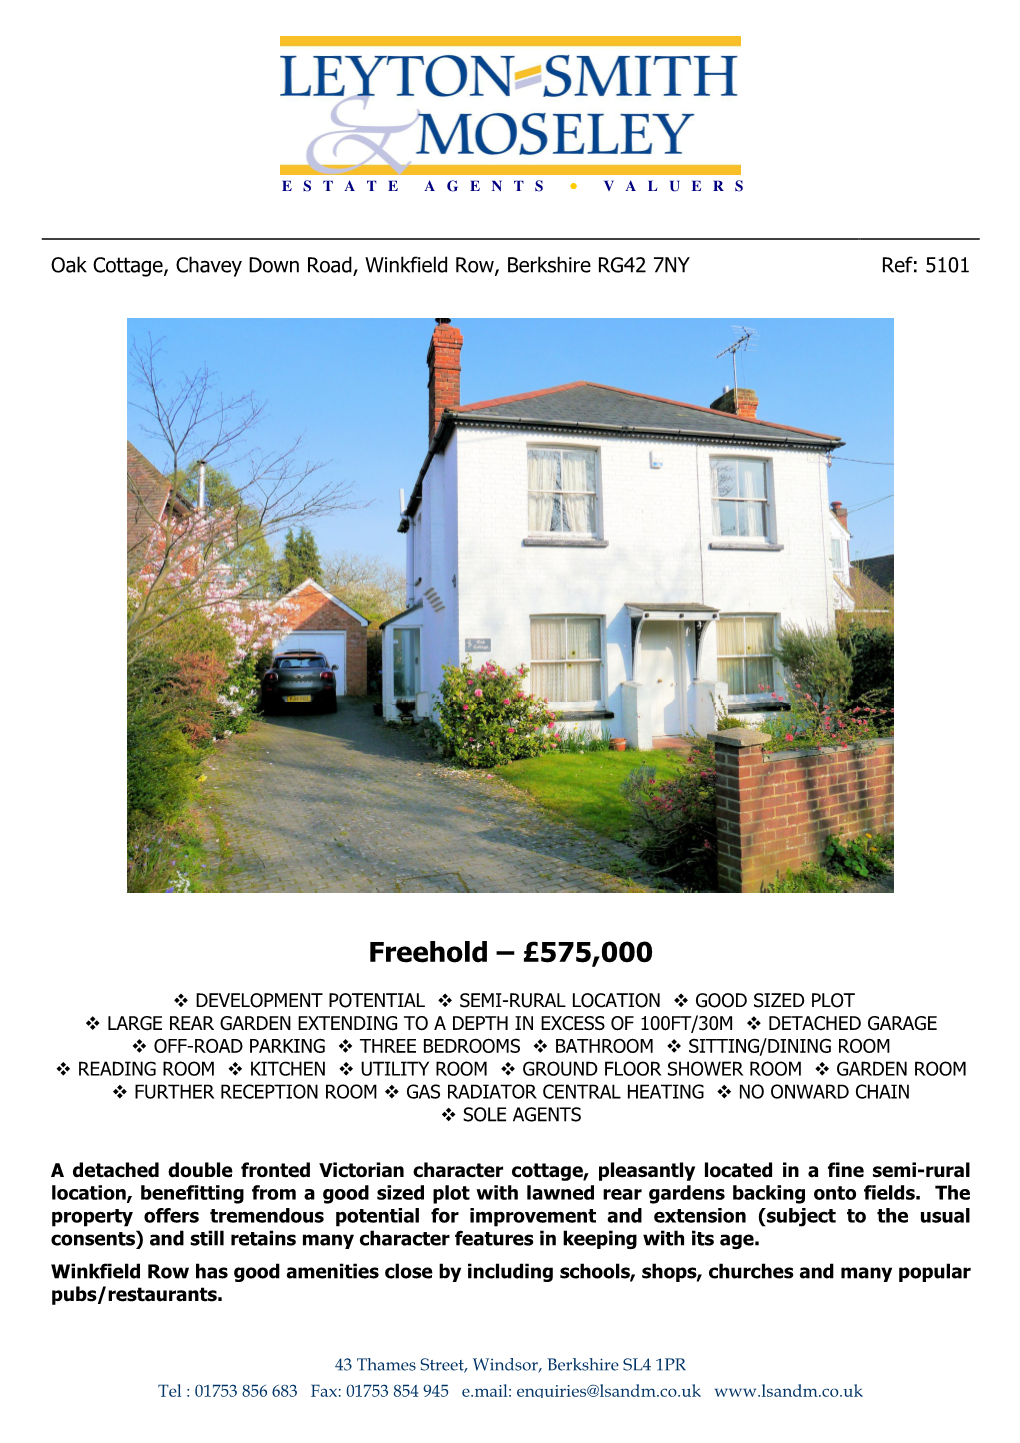 Freehold – £575,000